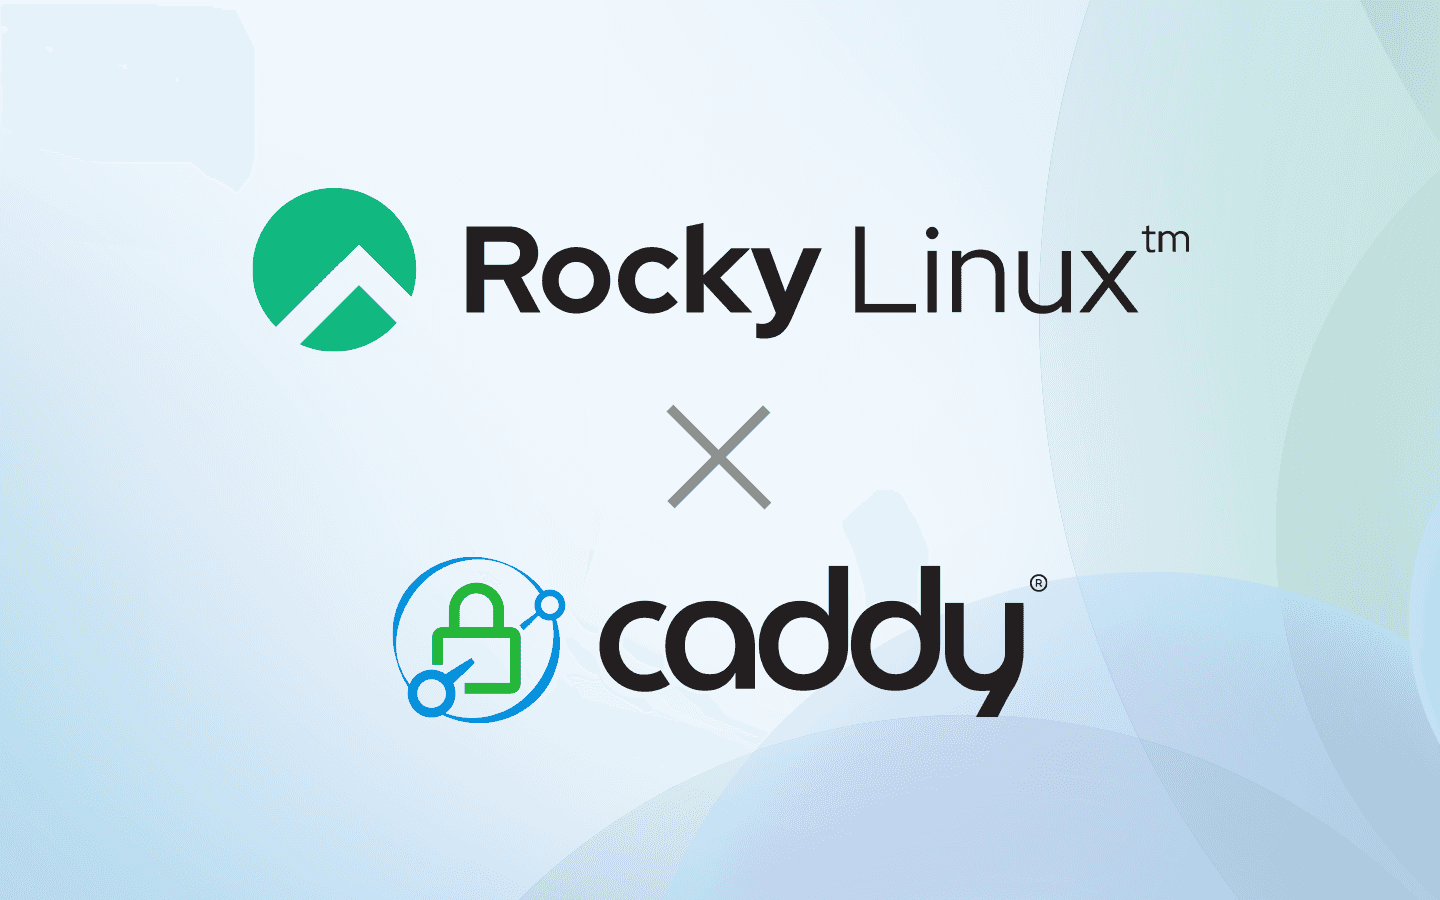 How to Install and Configure the Caddy Web Server on Rocky Linux